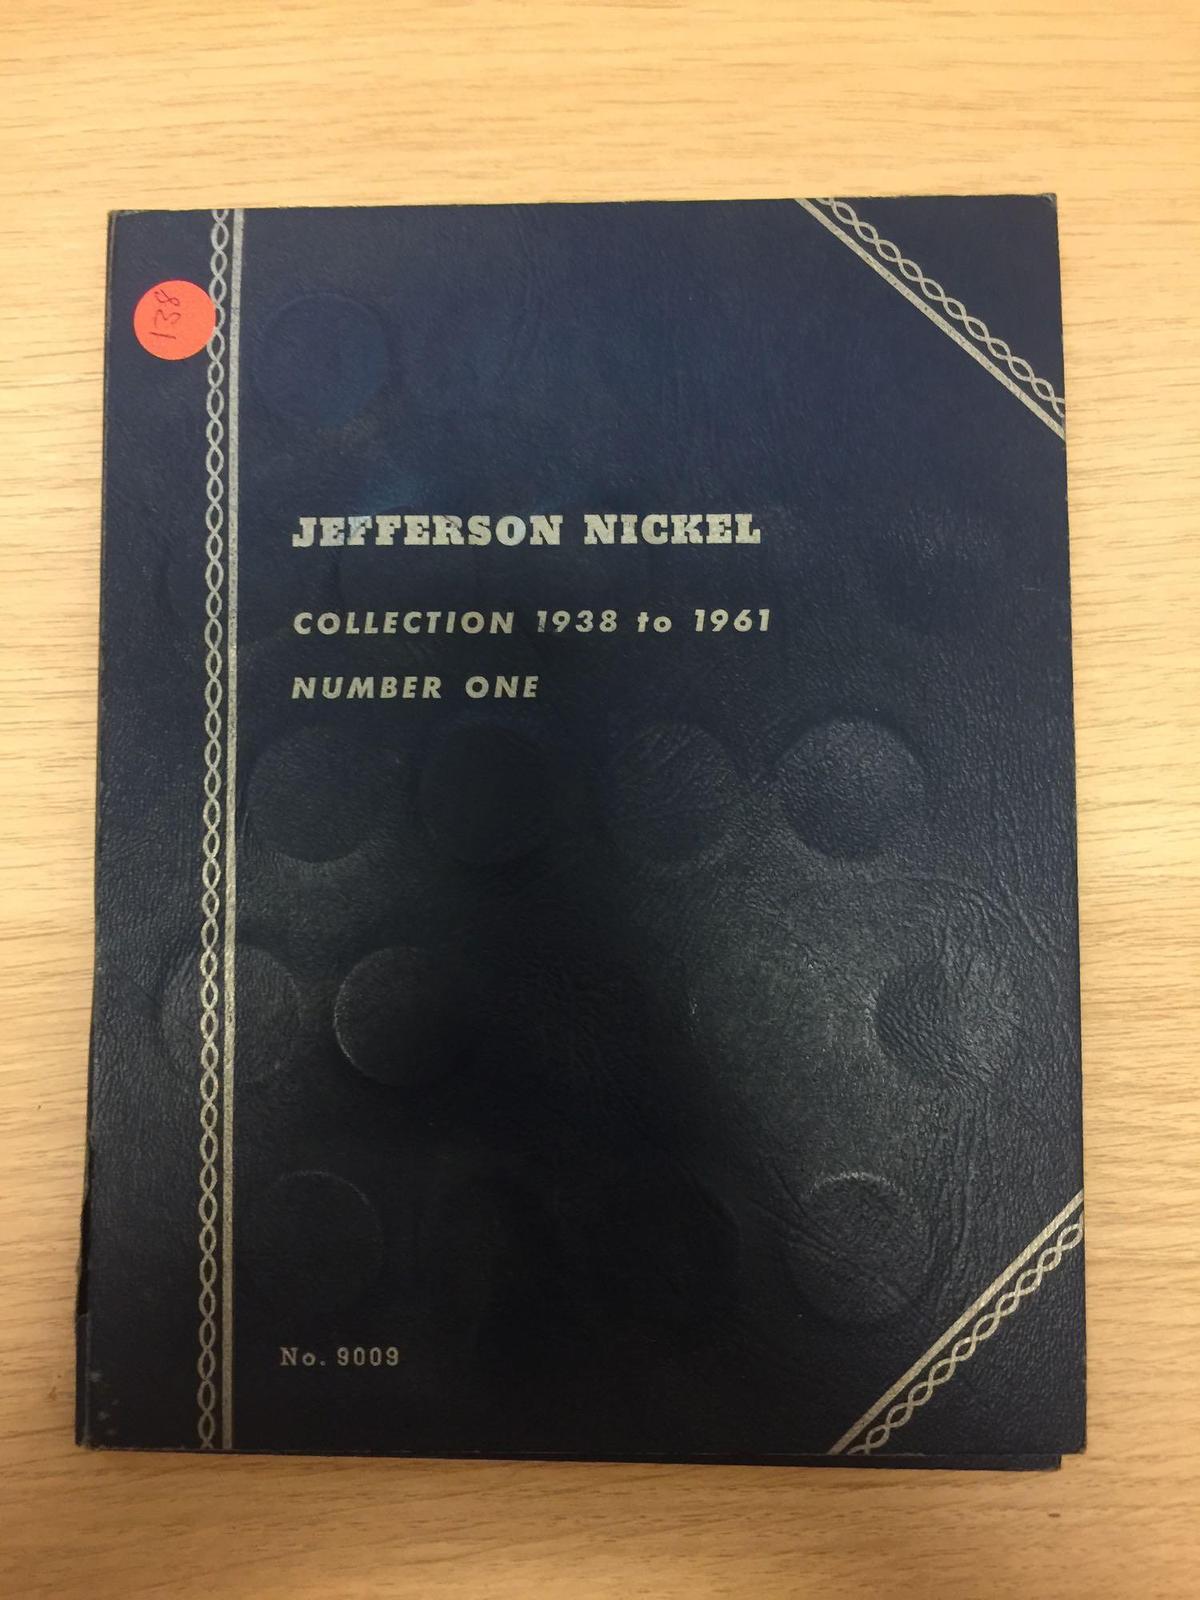 Vintage Whitman Jefferson Nickel 1938-1961 Coin Collector Book with 42 Coins (9 Silver Coins)